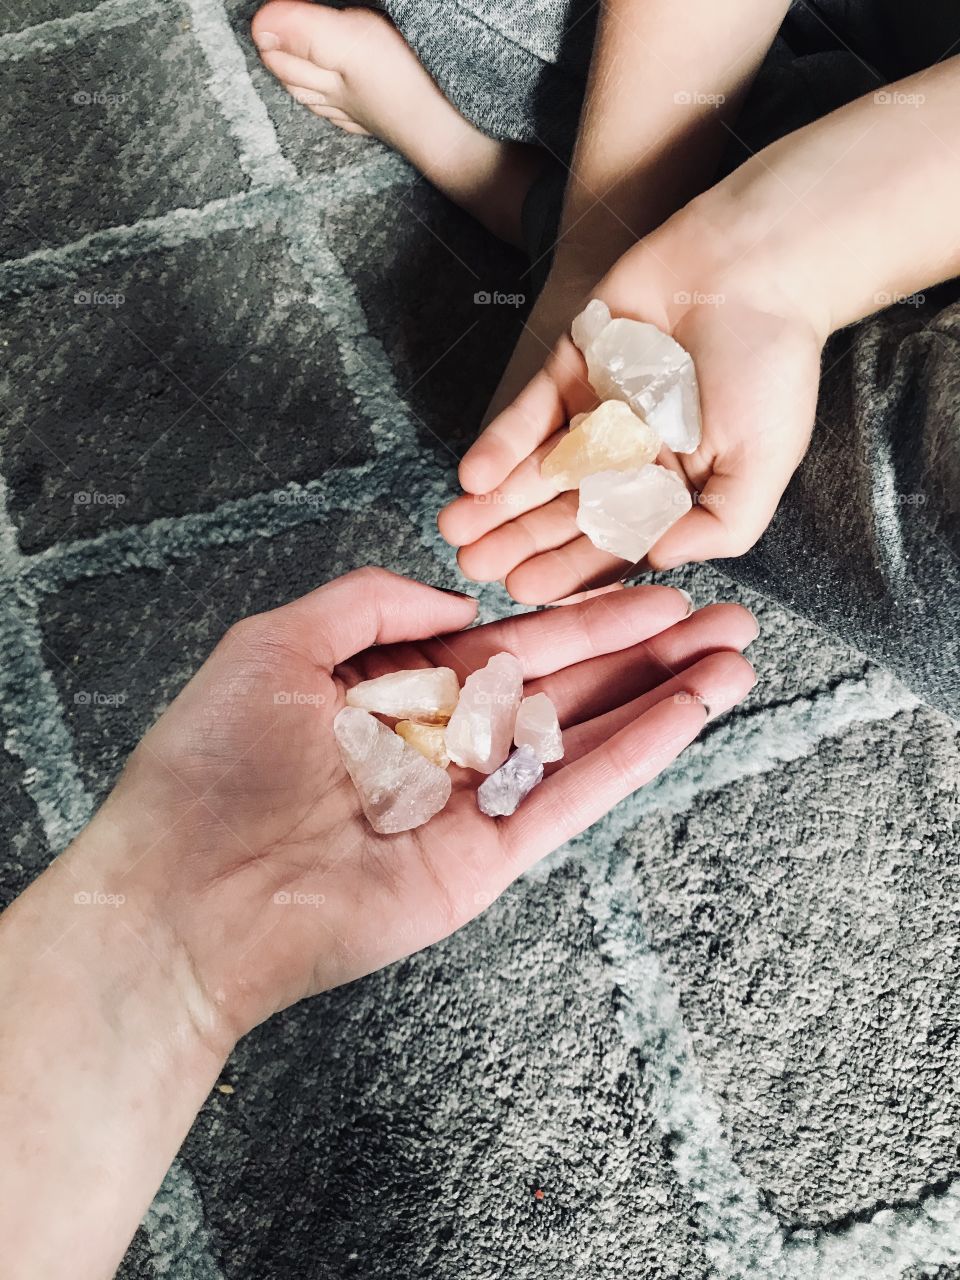 Collecting and holding magnificent and beautiful crystals with my child makes me happy. 